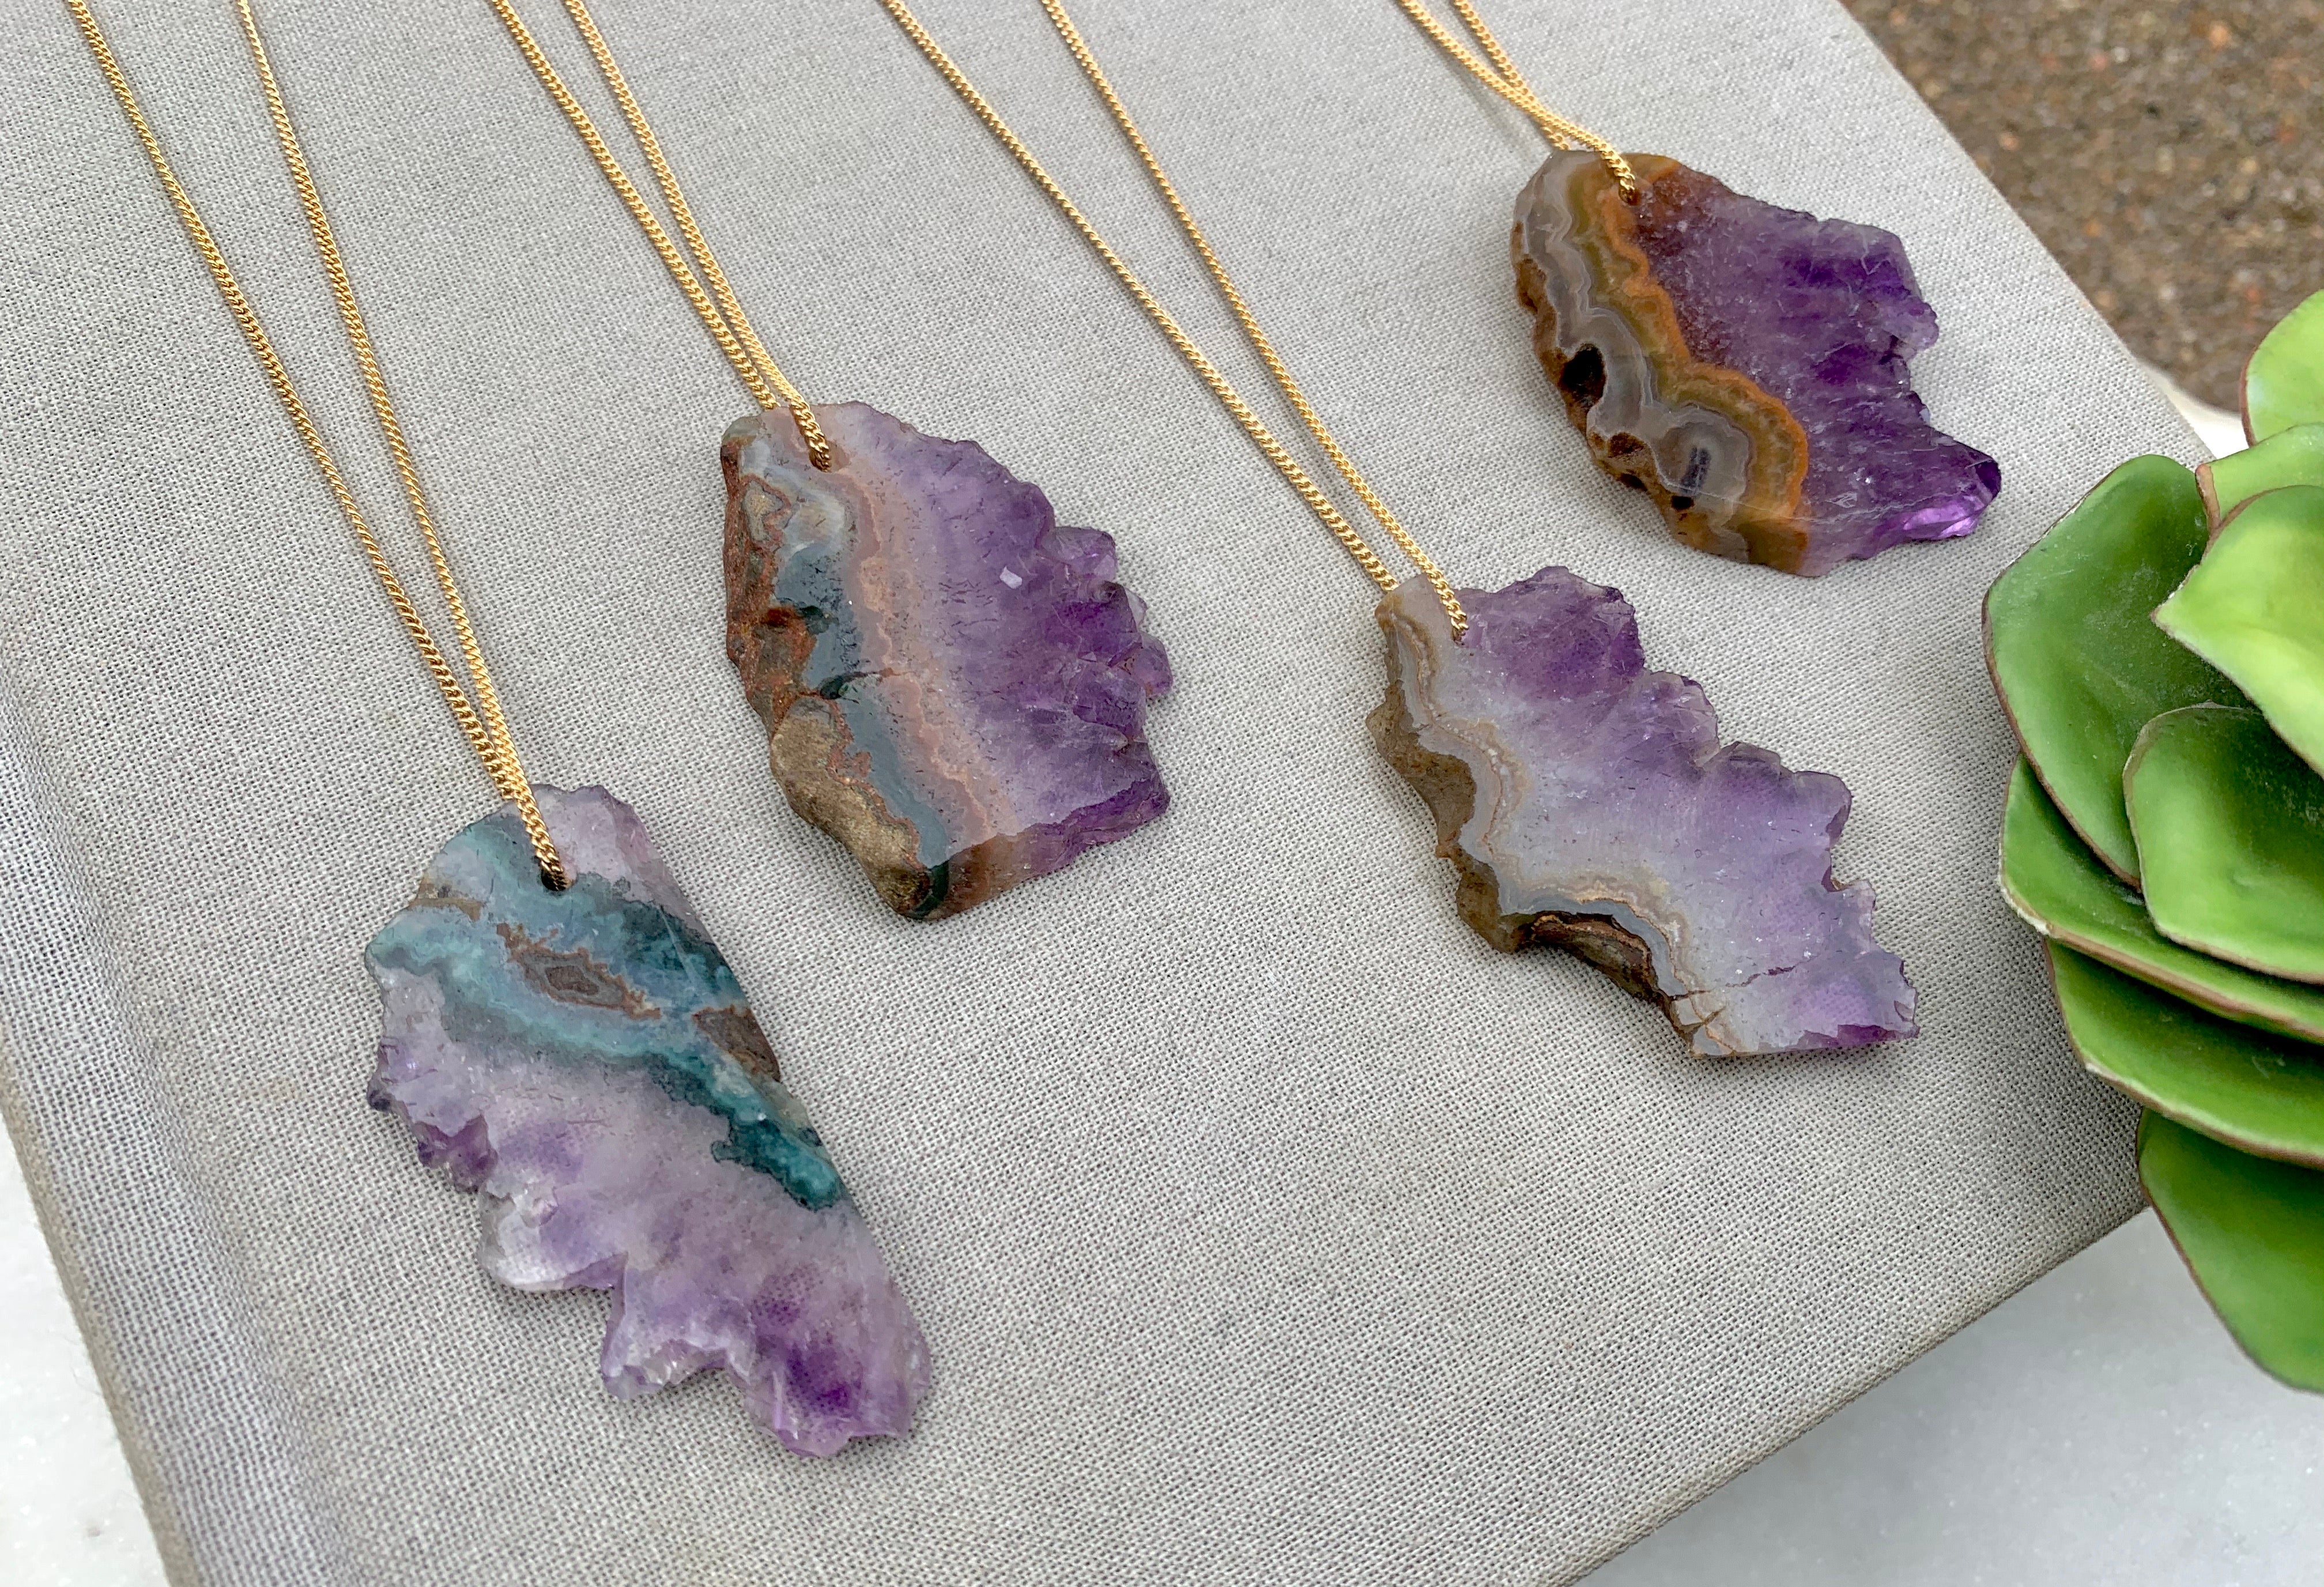 Genuine Raw Amethyst Slice Necklace - Gold Filled